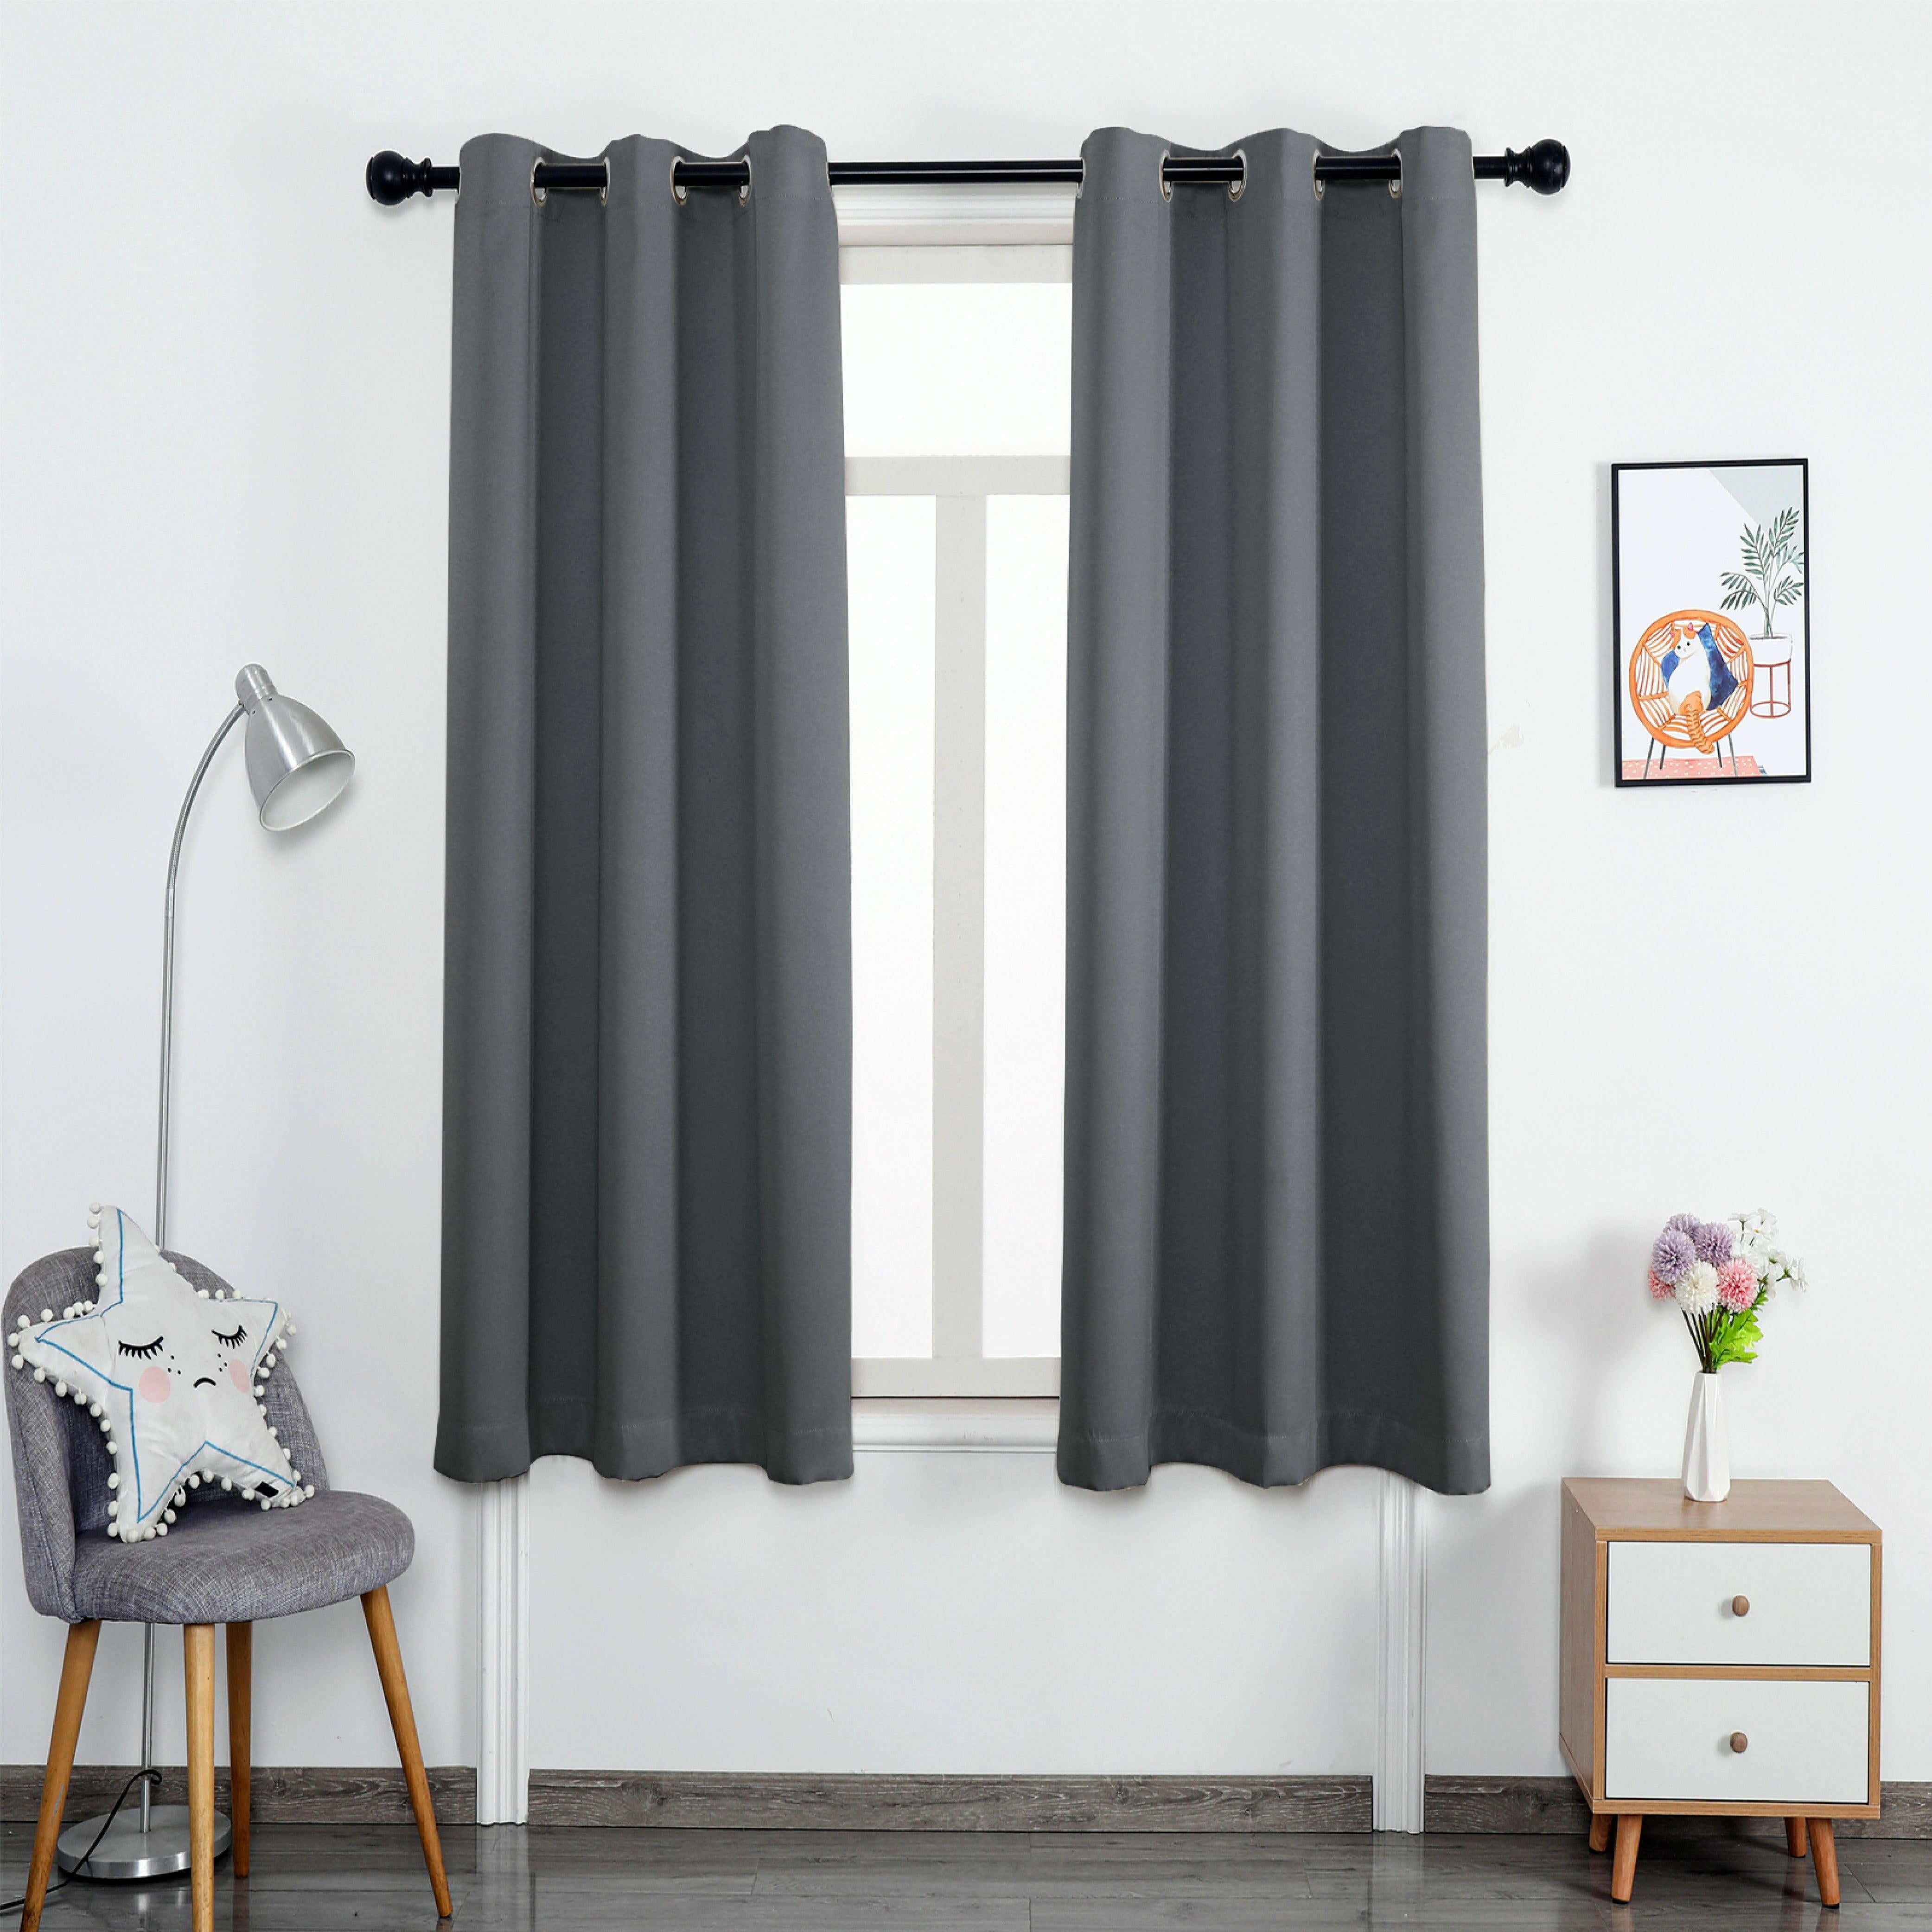 Hyper Cover 3-Layers Blockout Curtains Iron | Window Curtains | Brilliant Home Living